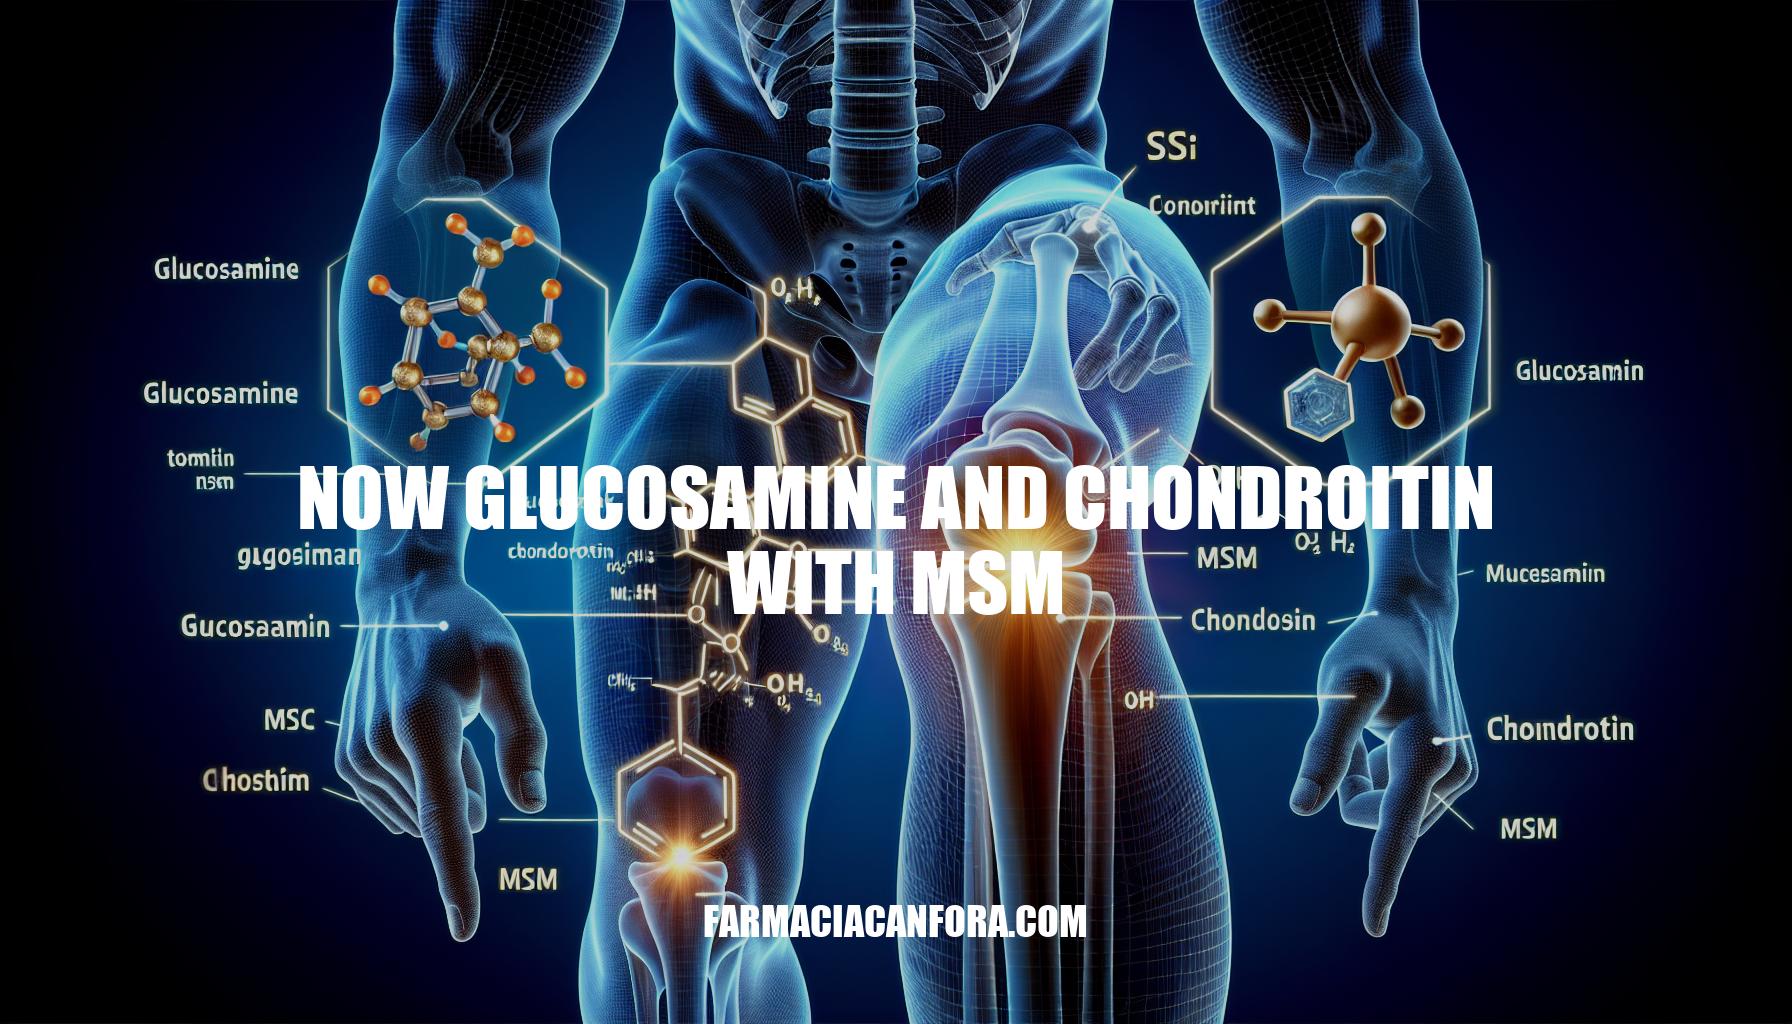 Now Glucosamine and Chondroitin with MSM: Benefits and Uses